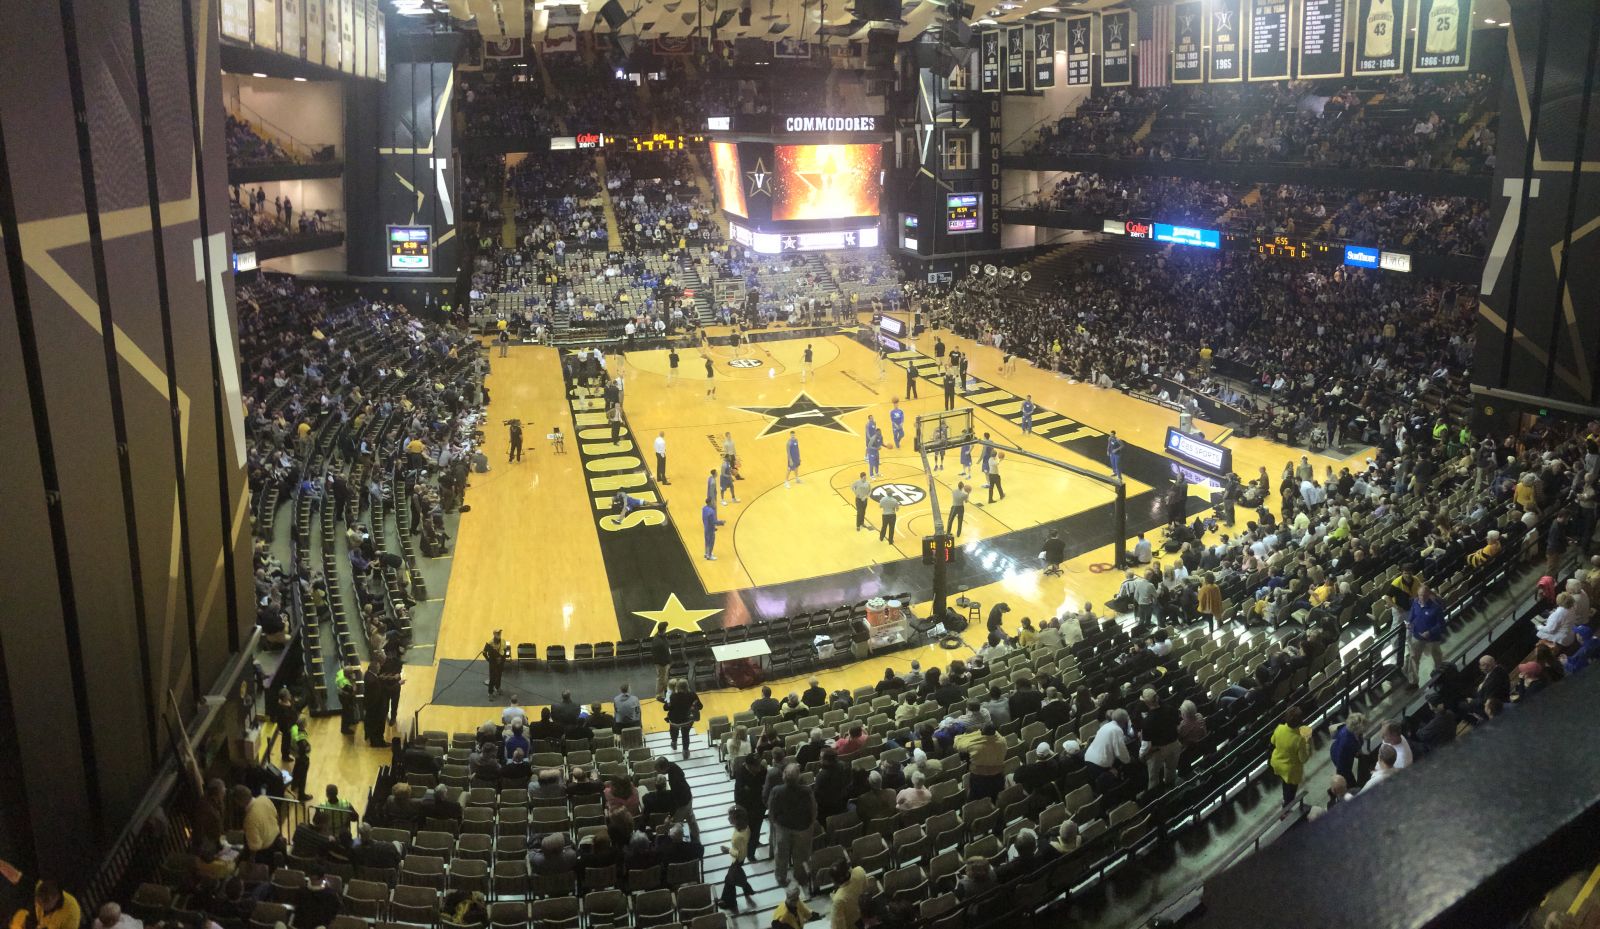 section 3l, row 1 seat view  - memorial gymnasium